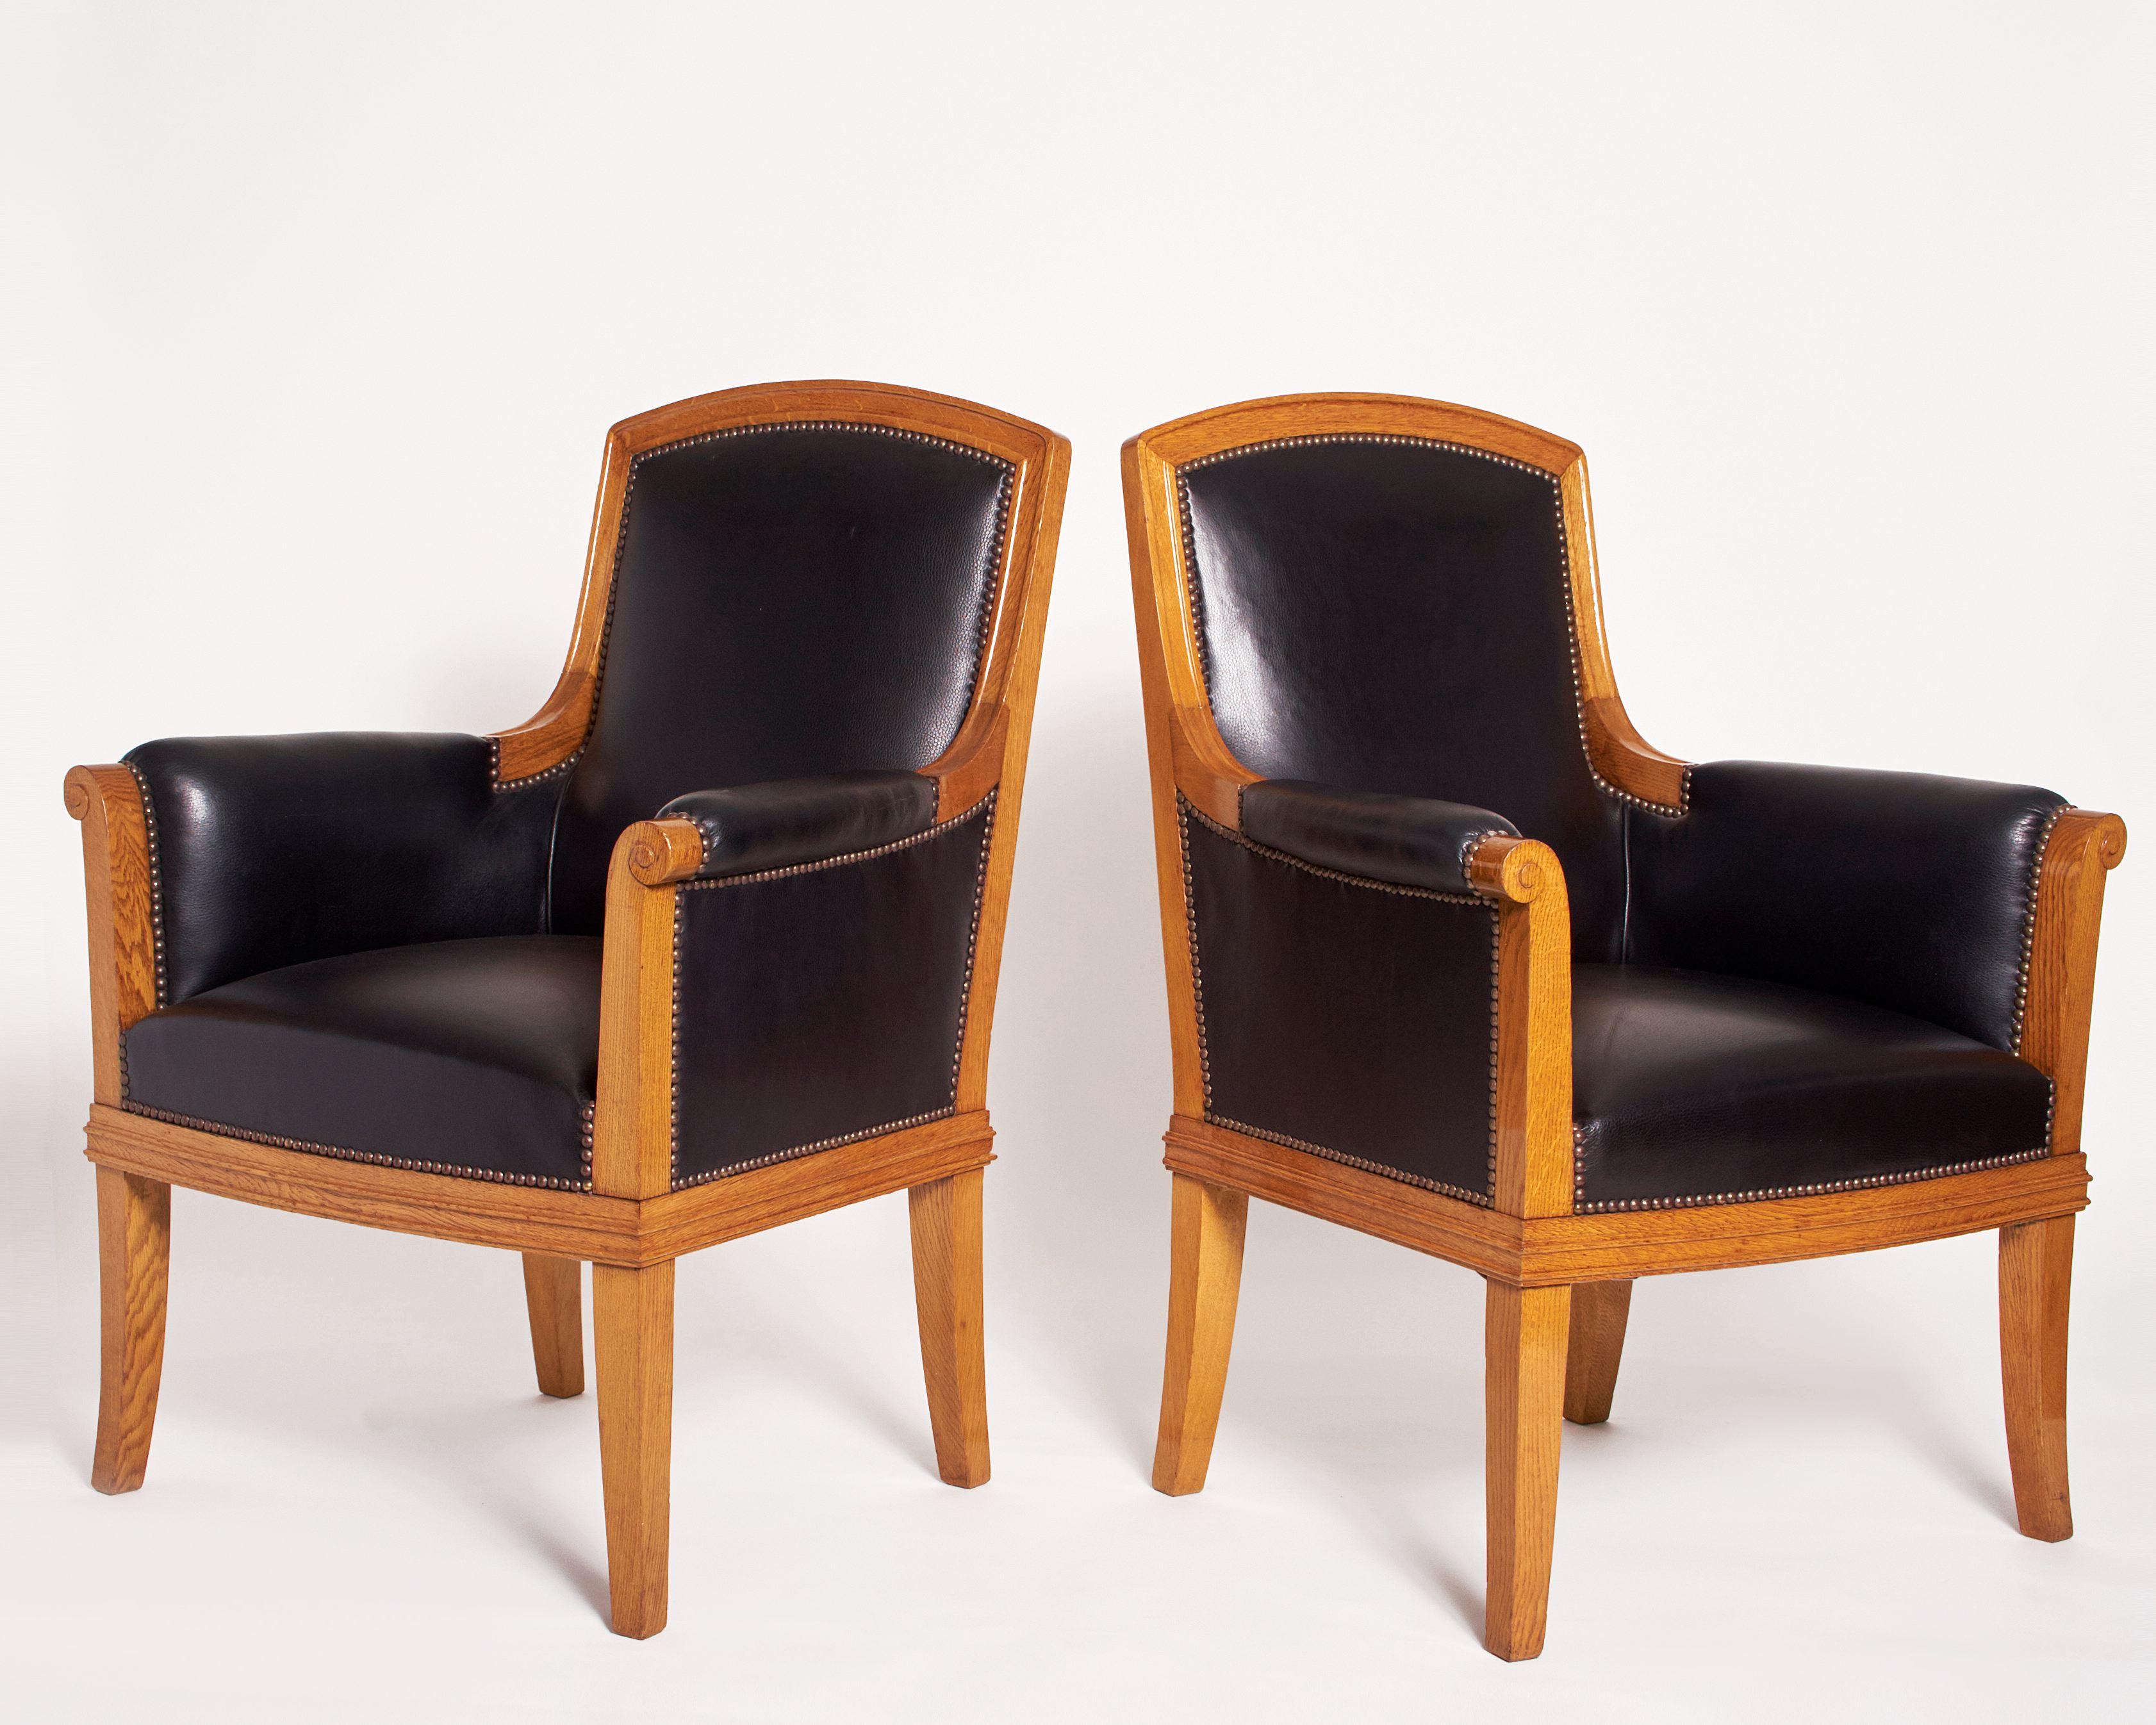 Steel Louis Süe, Pair of Oak and Leather Armchairs, France, C. 1940 For Sale